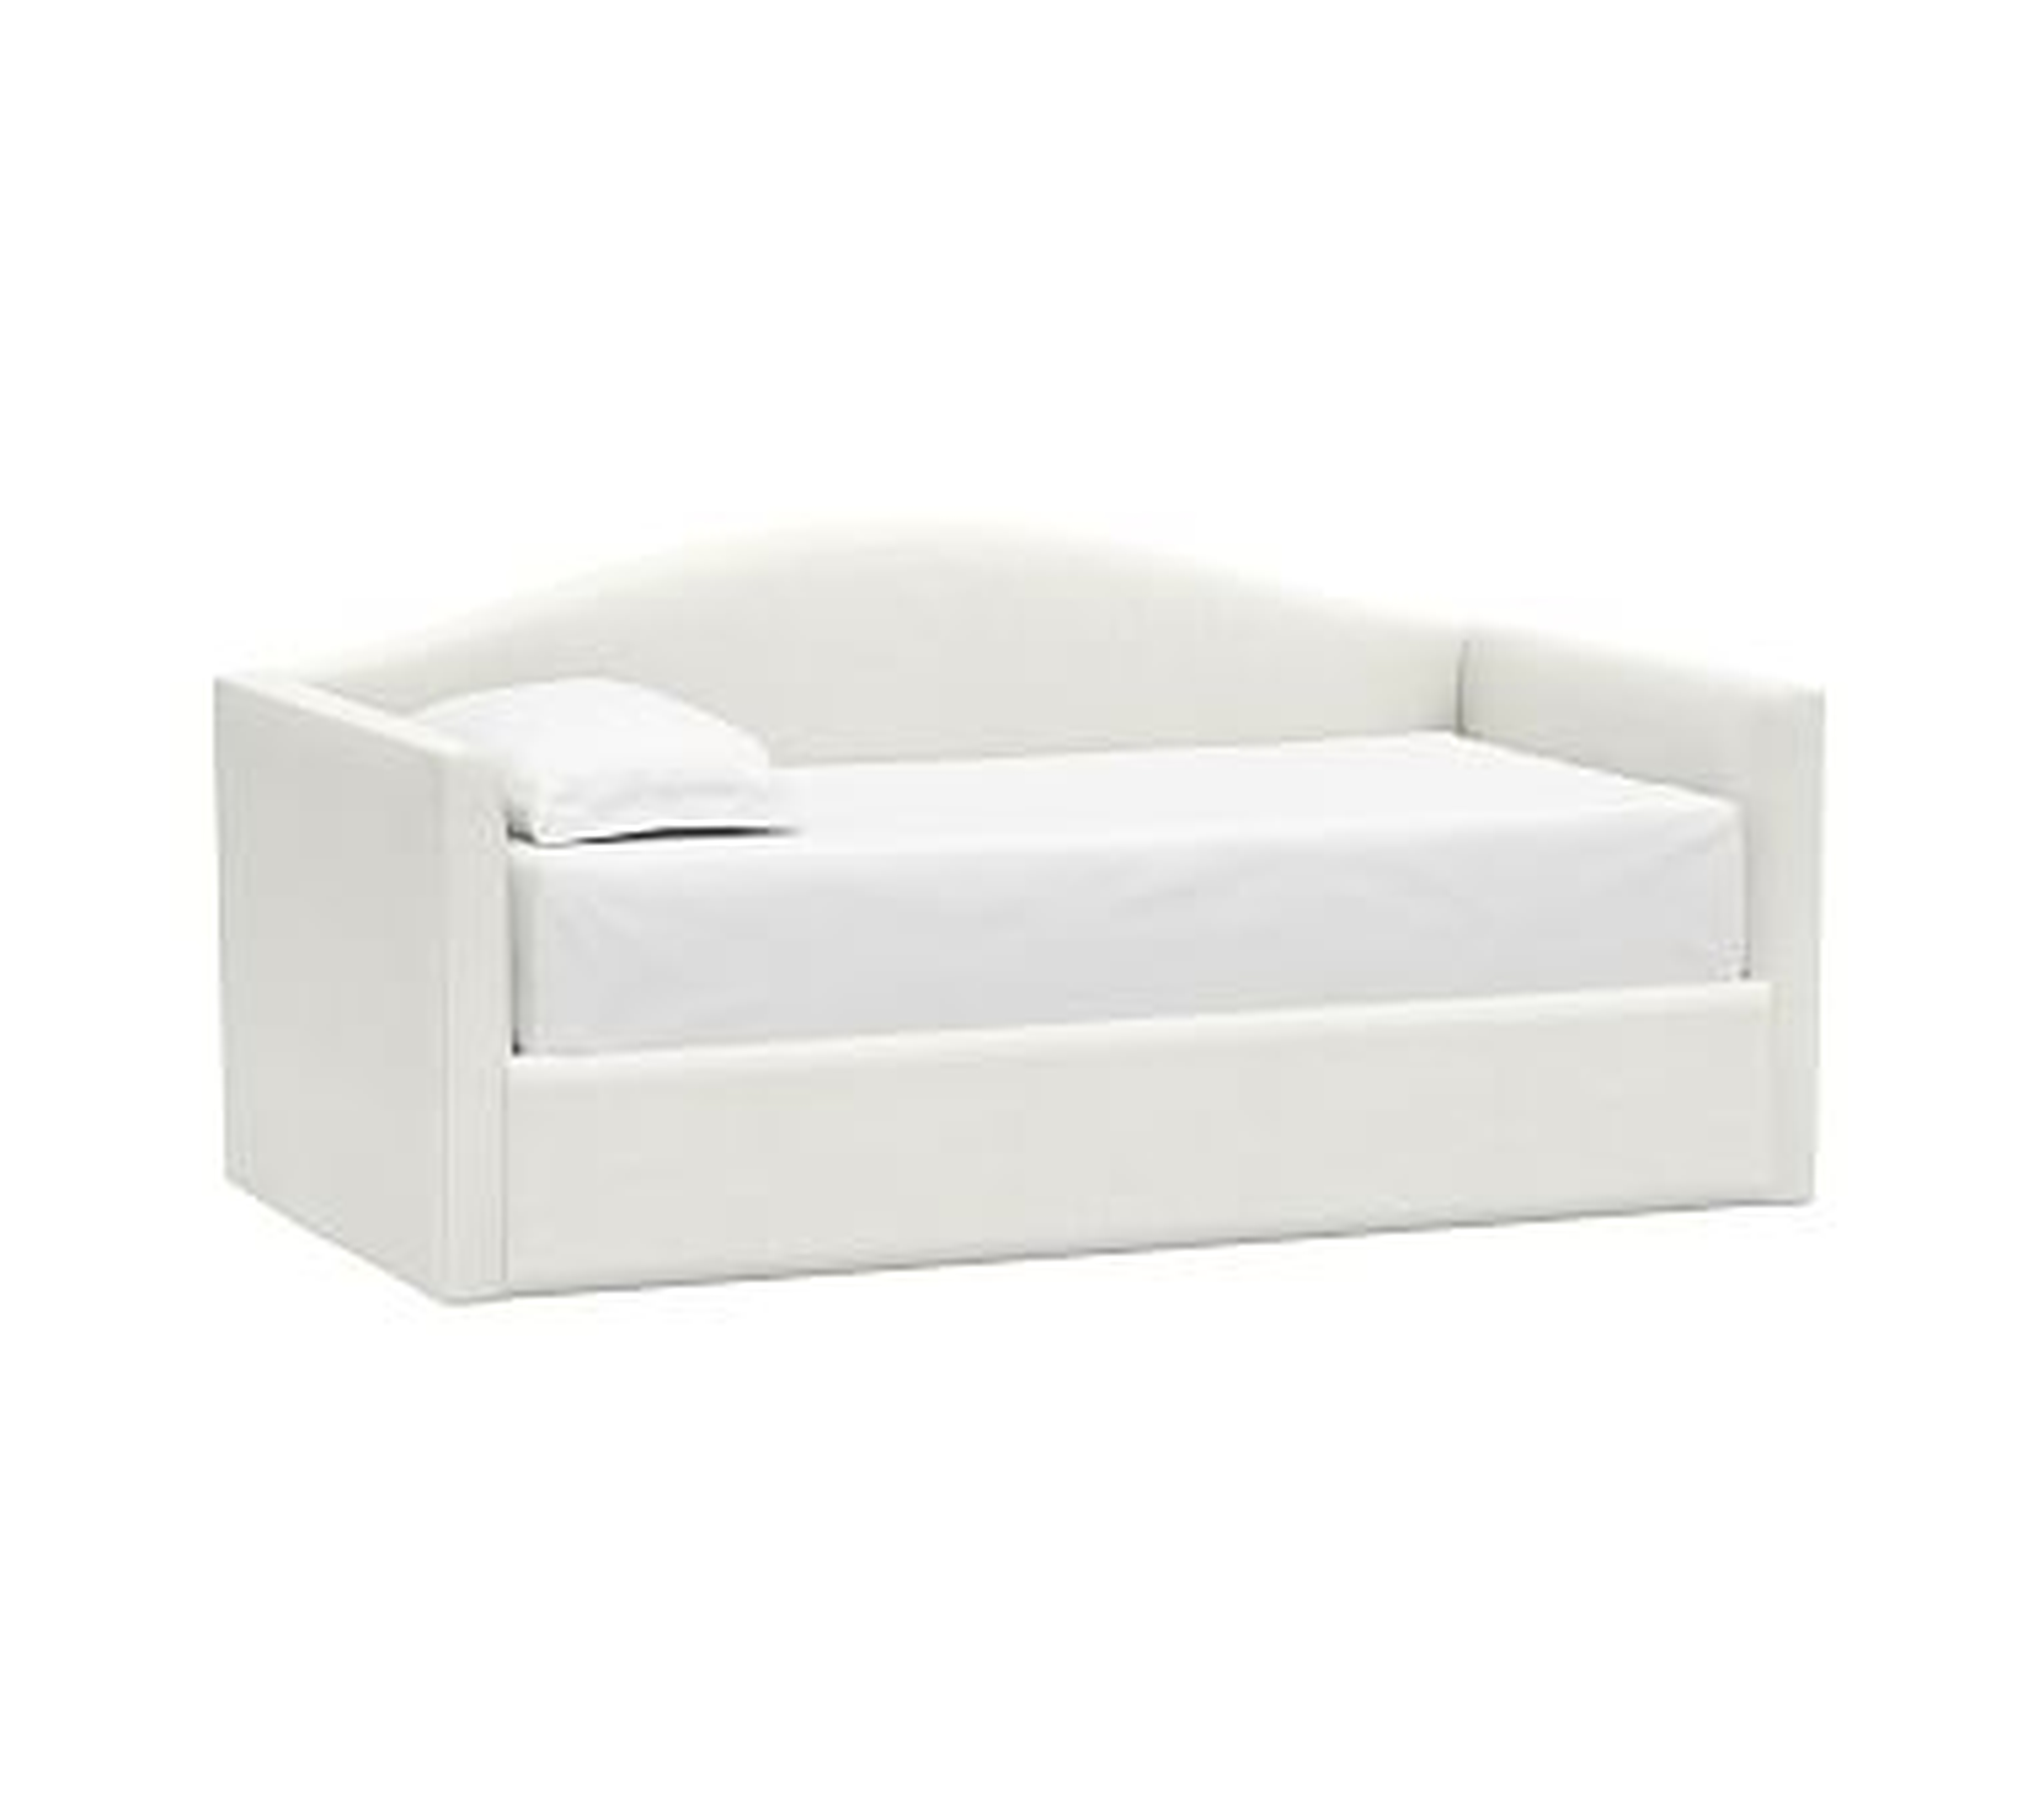 Raleigh Camelback Twin Daybed, Basketweave Slub Ivory (A) - Pottery Barn Kids